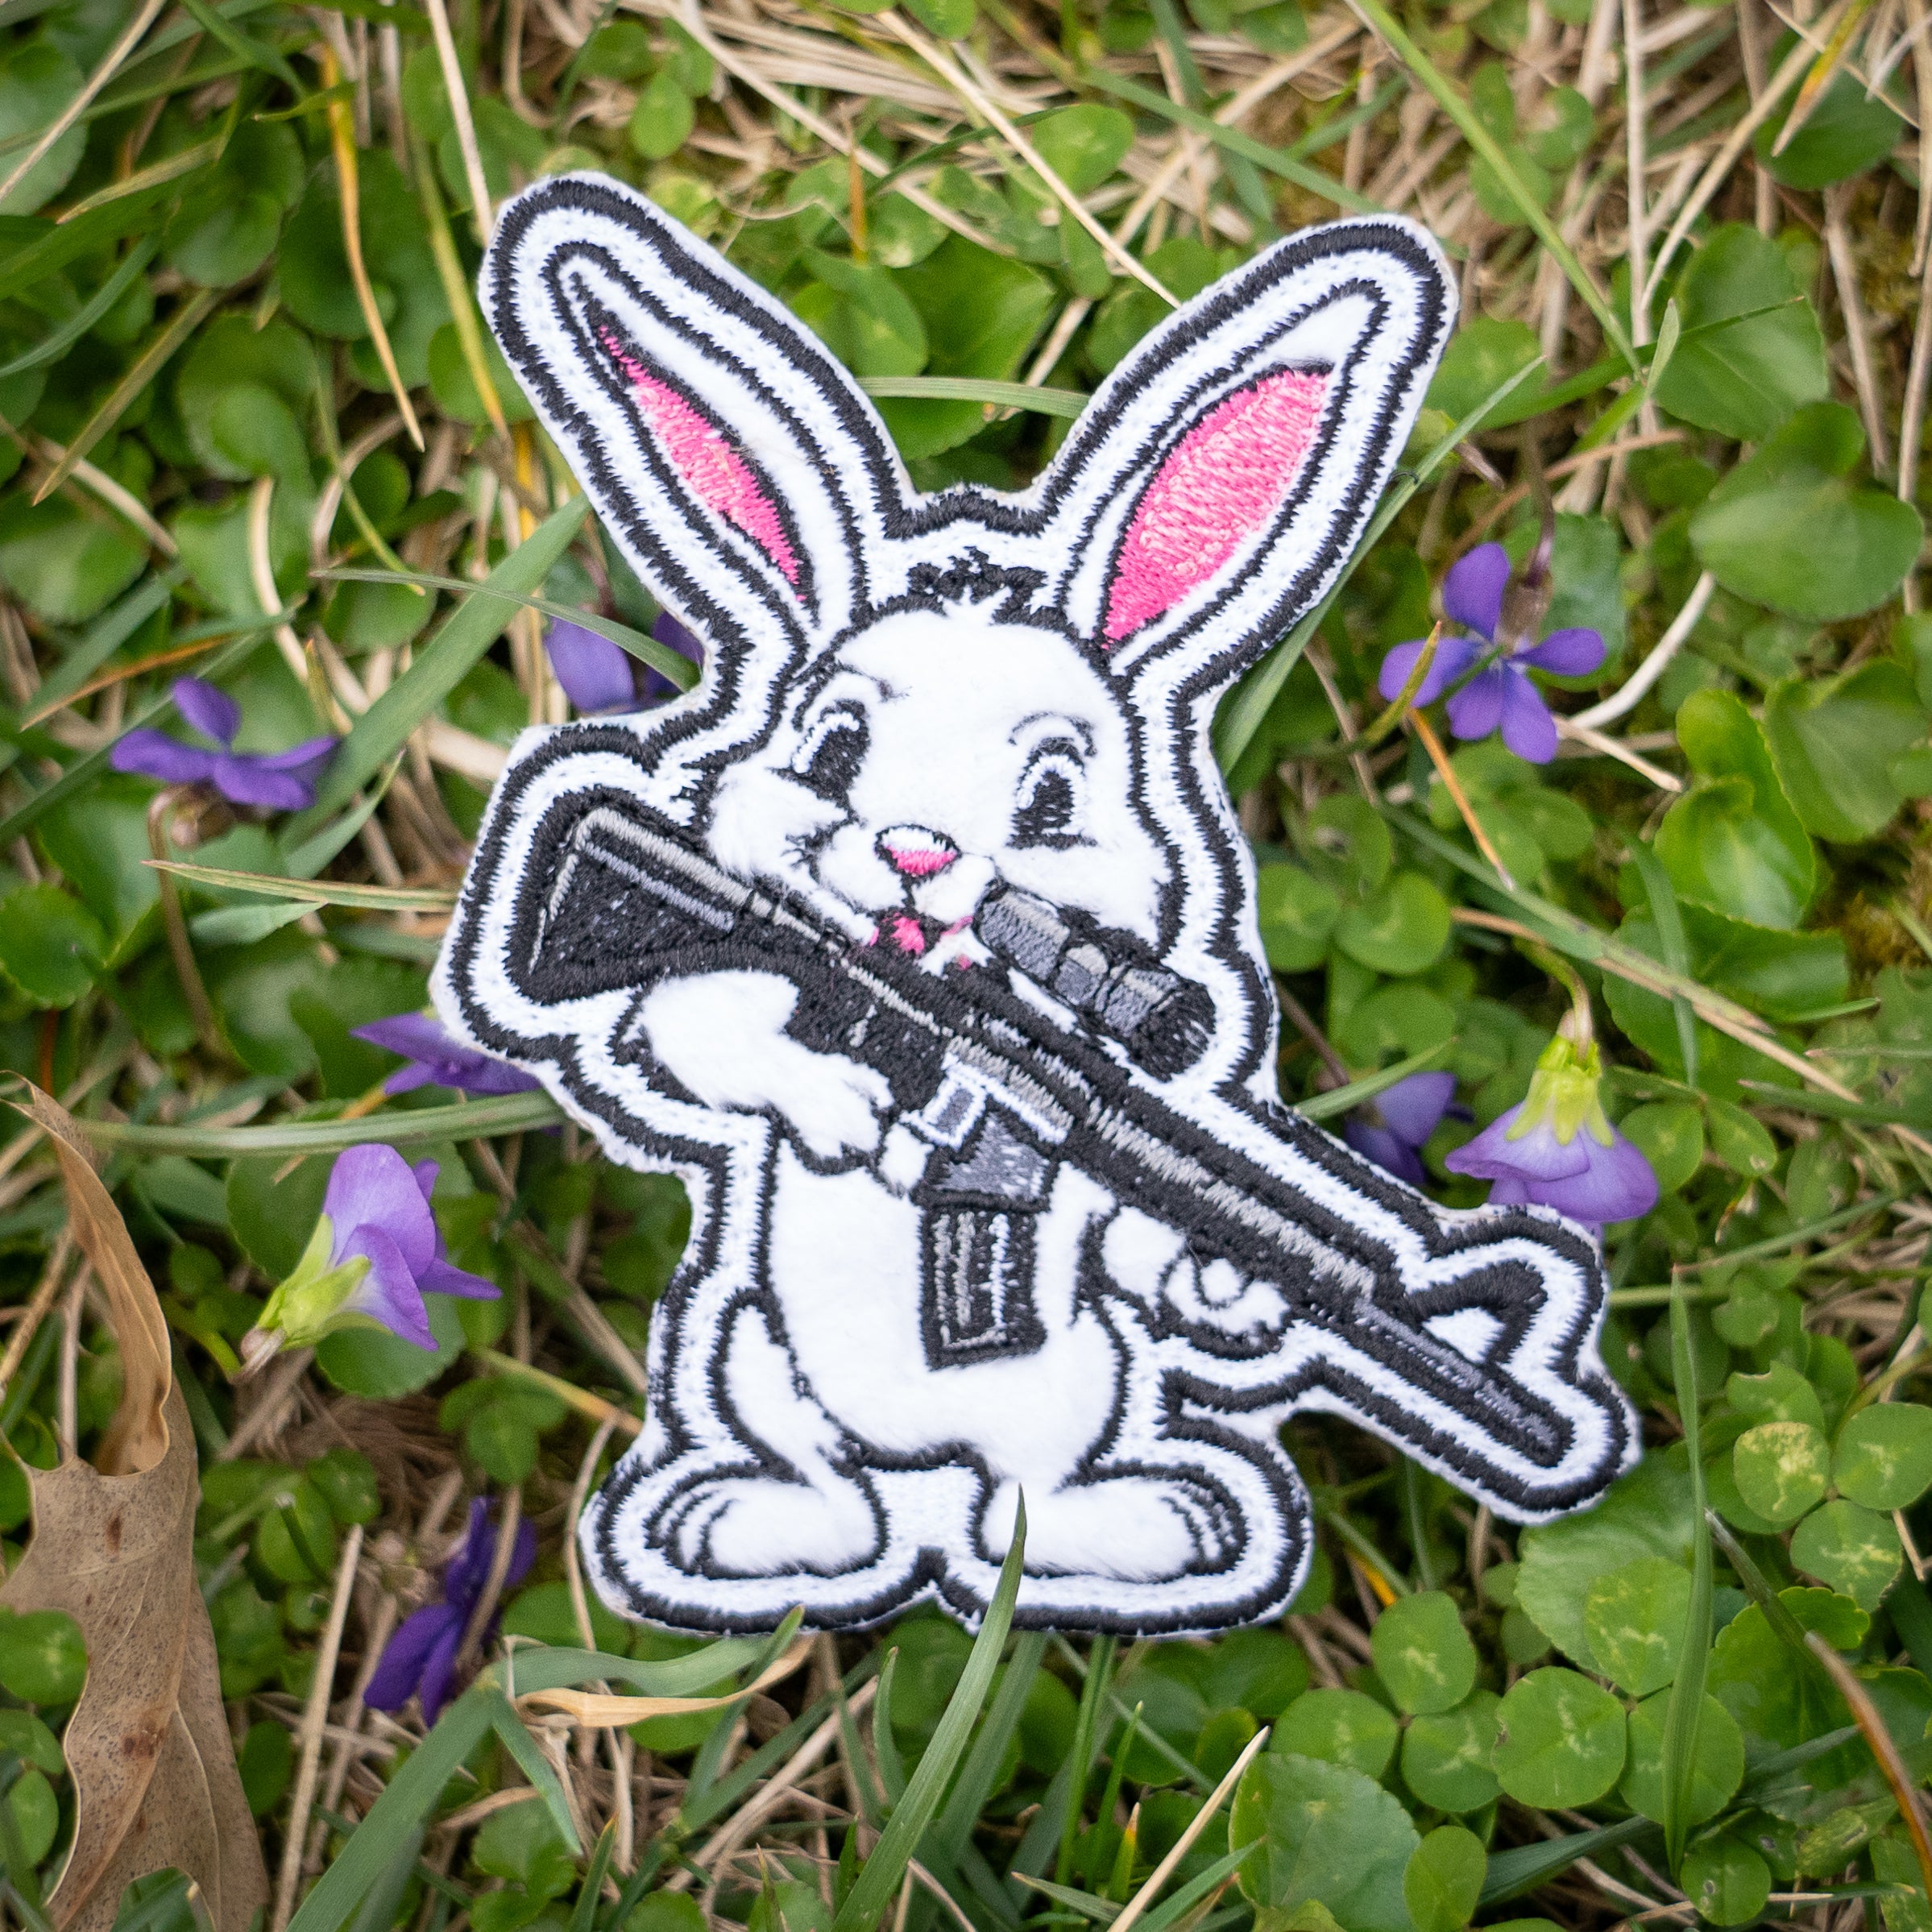 Tactical AR15 Battle Bunny - Fuzzy 4" Patch - Bad Bunny Collection